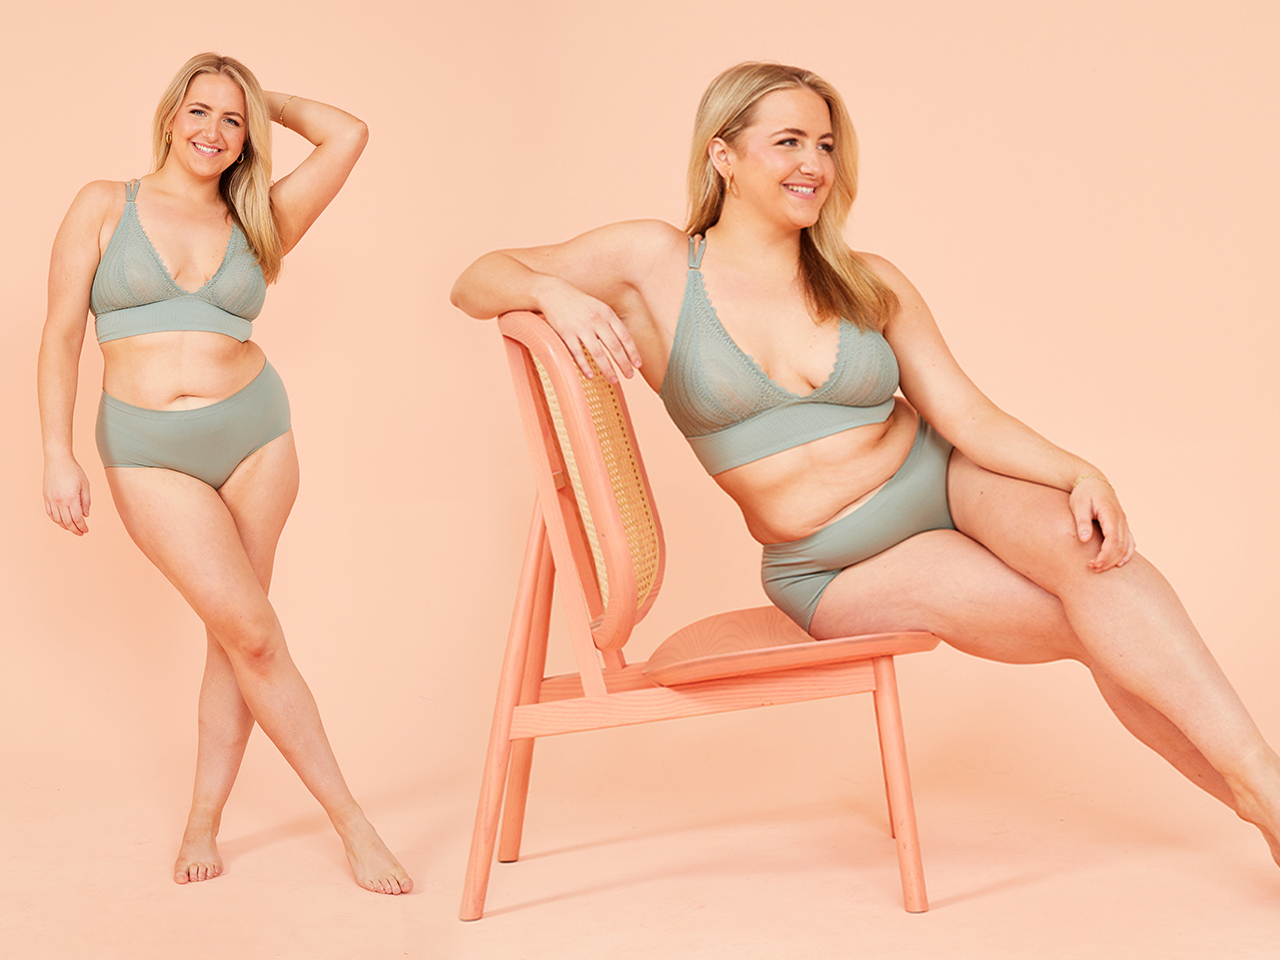 “The product closest to your body needs to feel the best. I’m excited for Arula to be the first choice of intimates for the mid- and plus-size consumer,” said Dana Seguin, brand president of Arula.